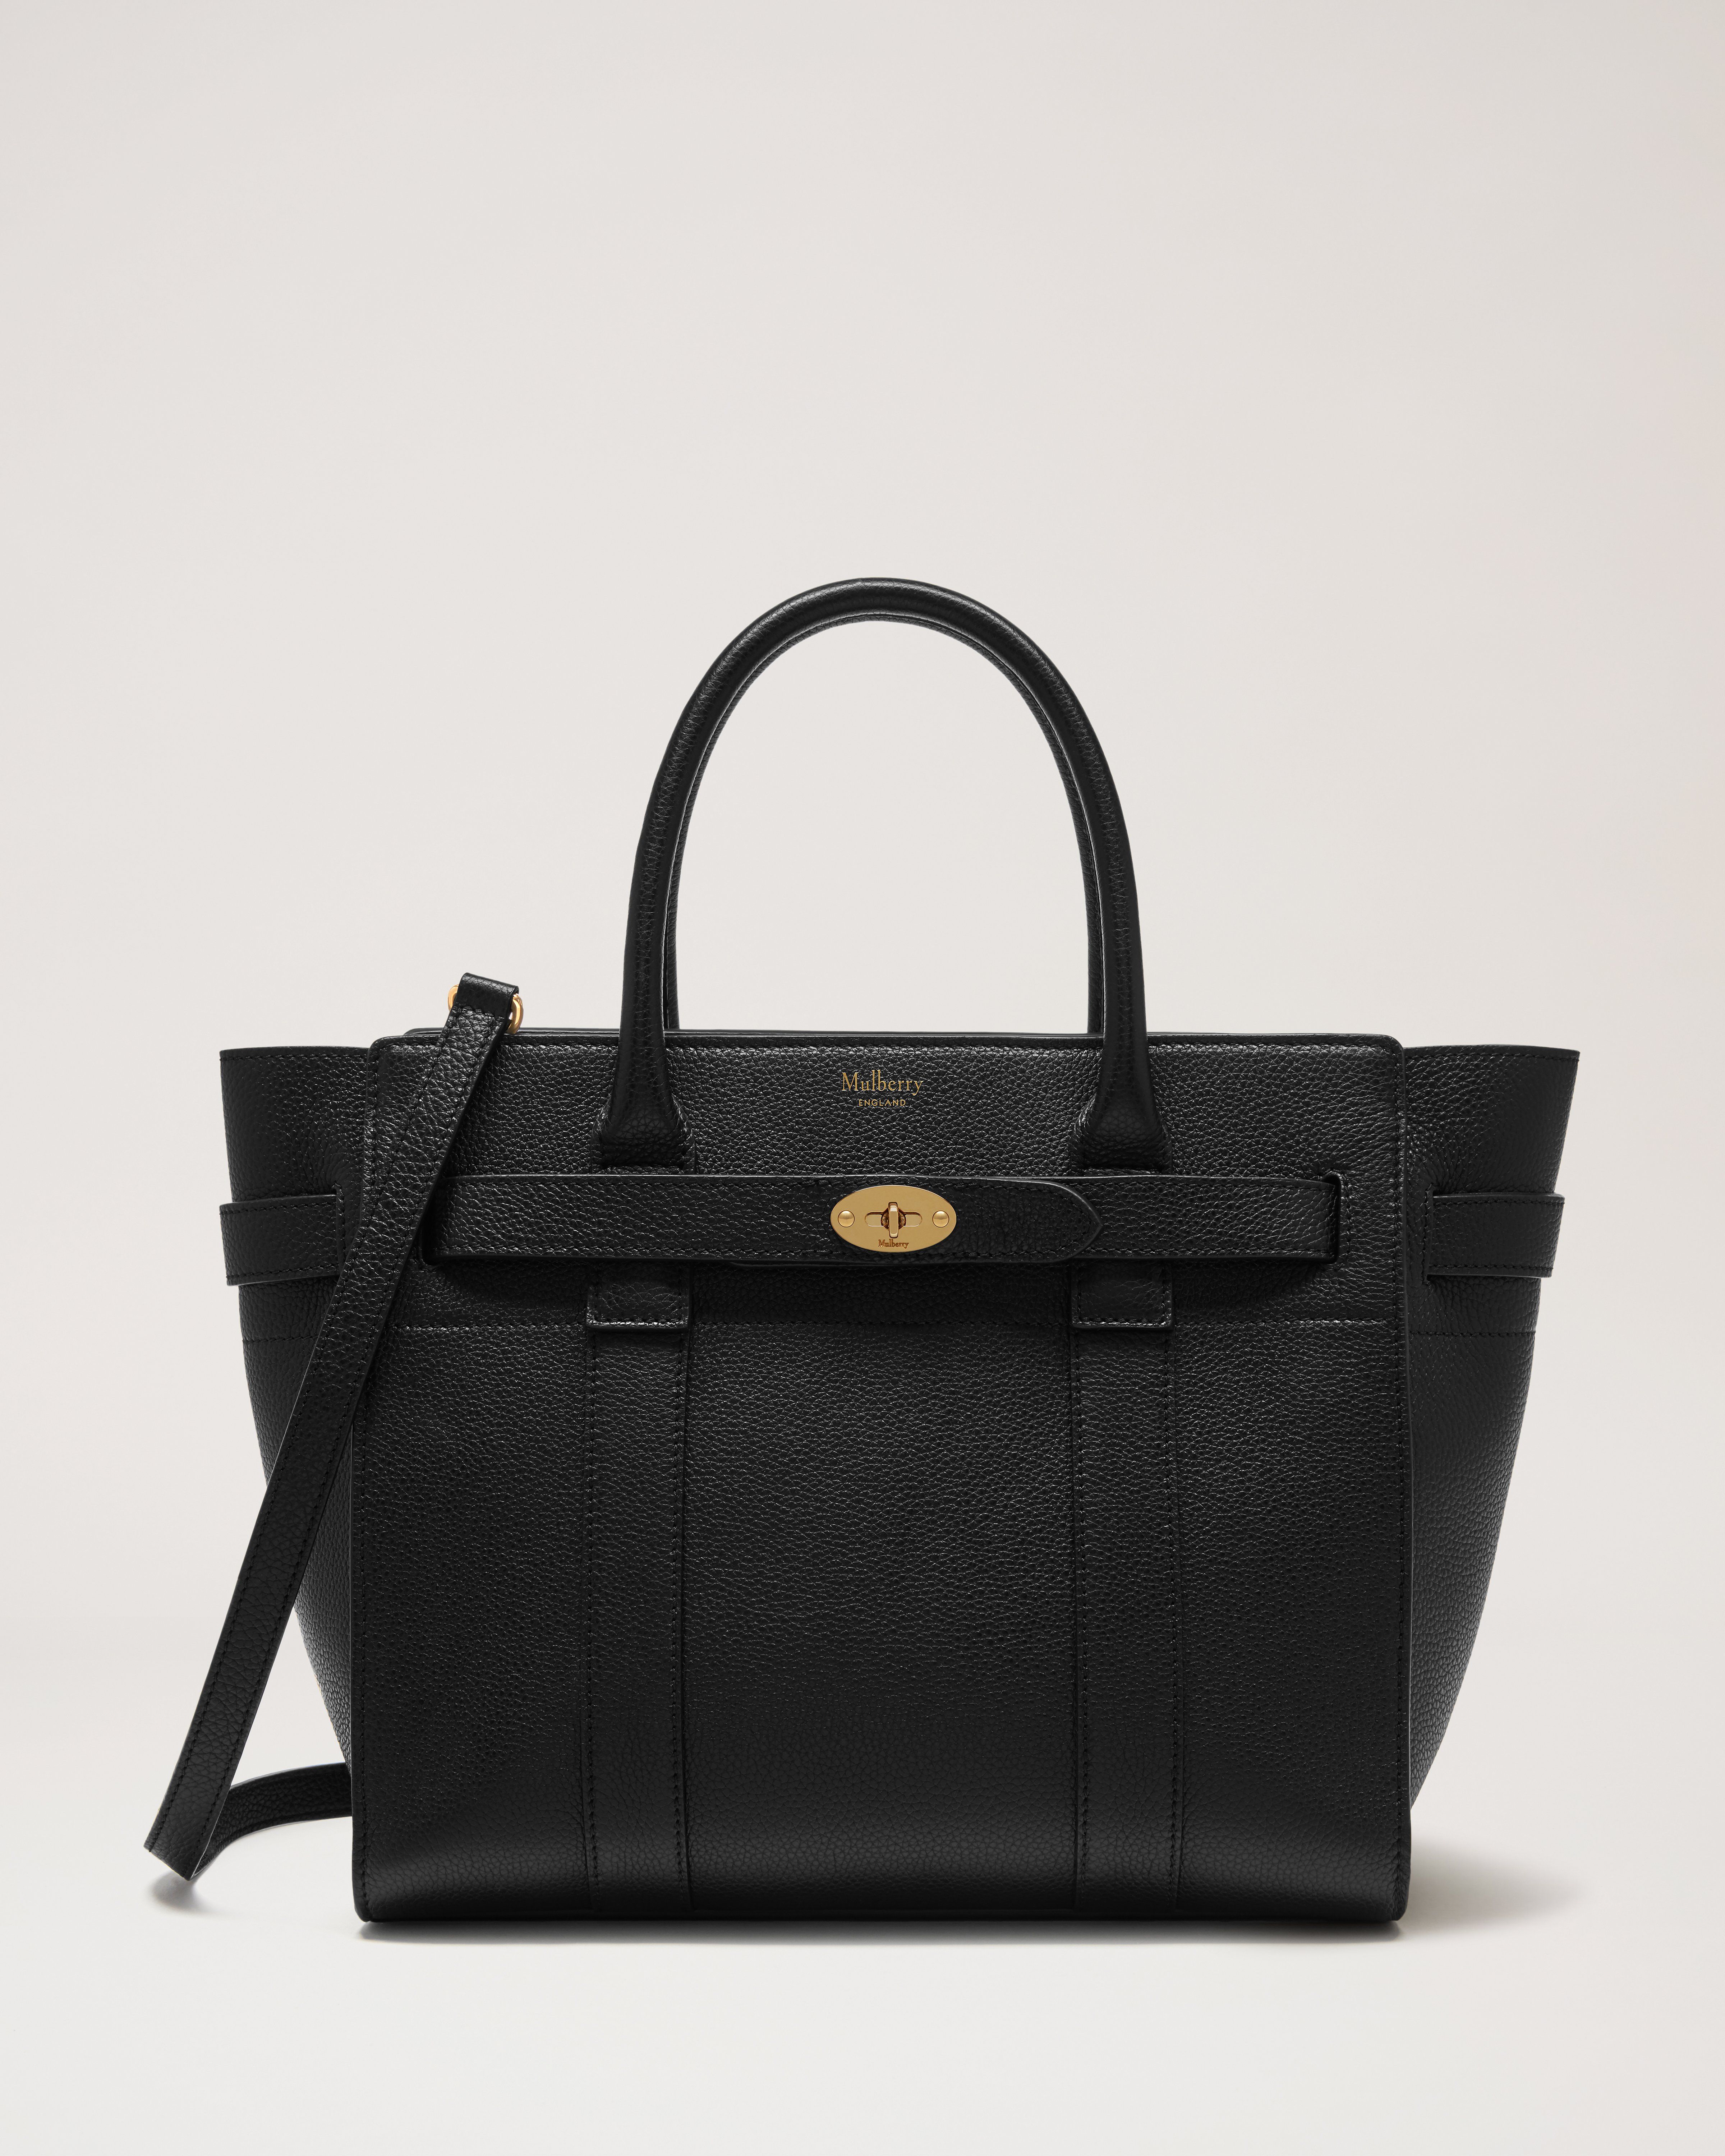 Mulberry Bayswater Handbag 330903 | Collector Square